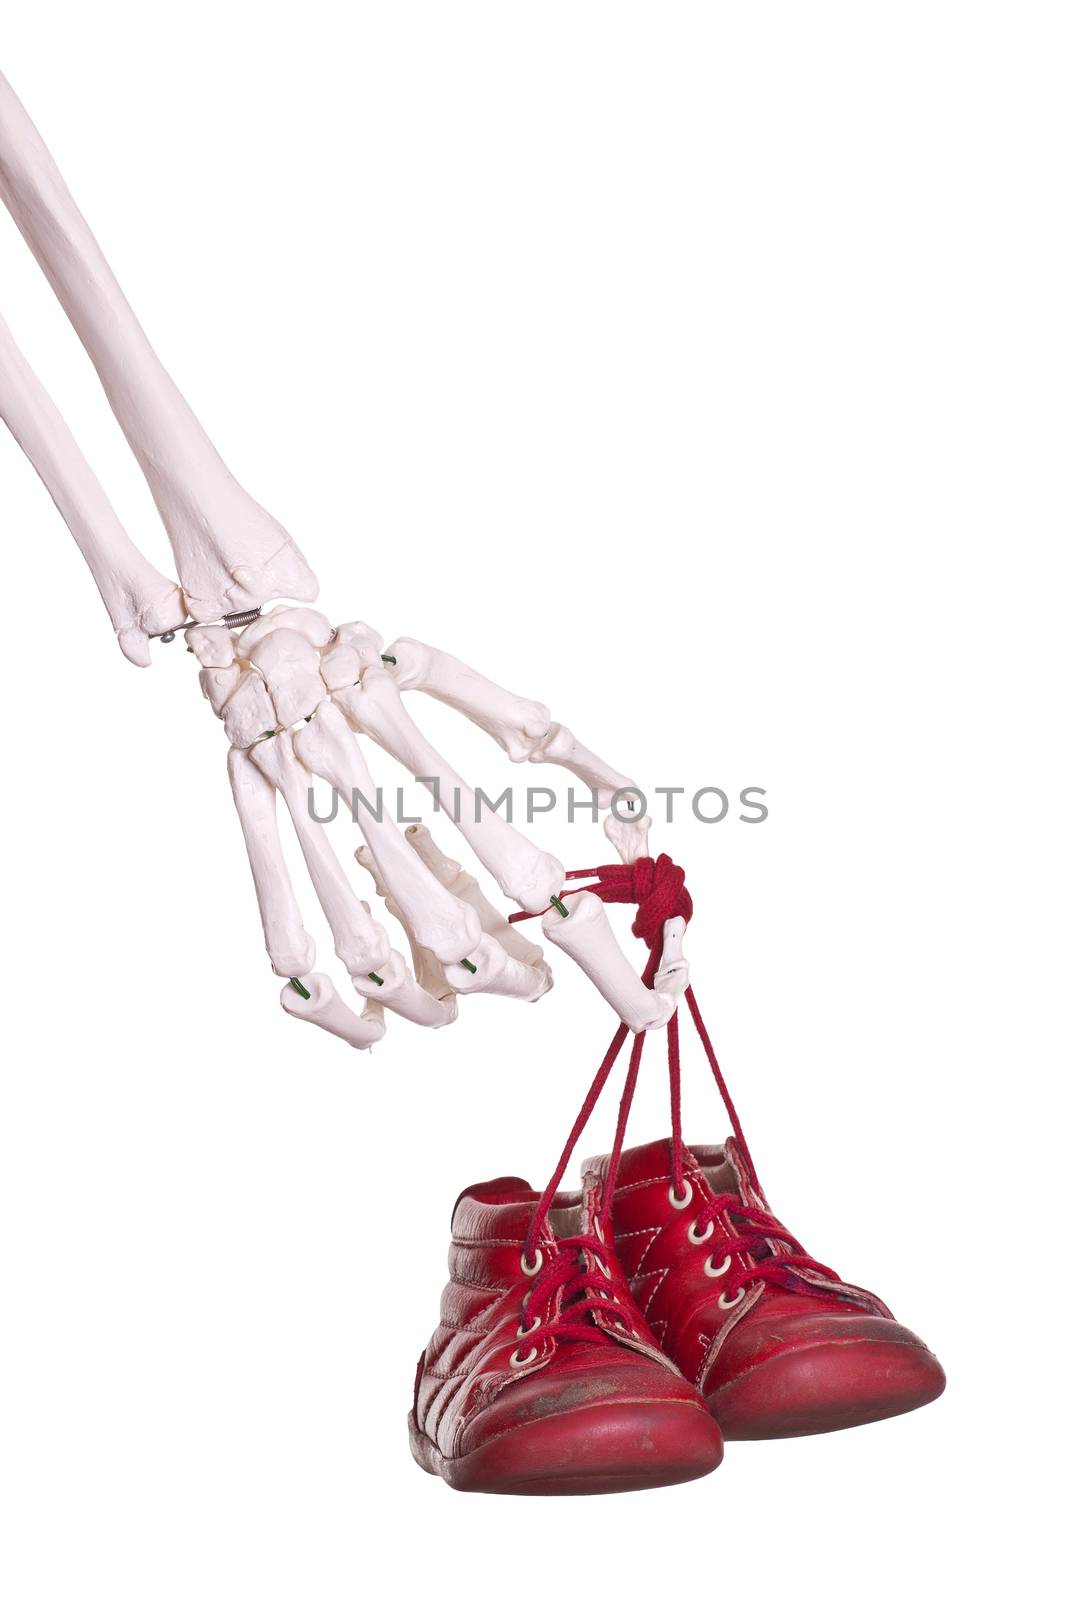 skeleton hand holding old red baby shoes by pterwort